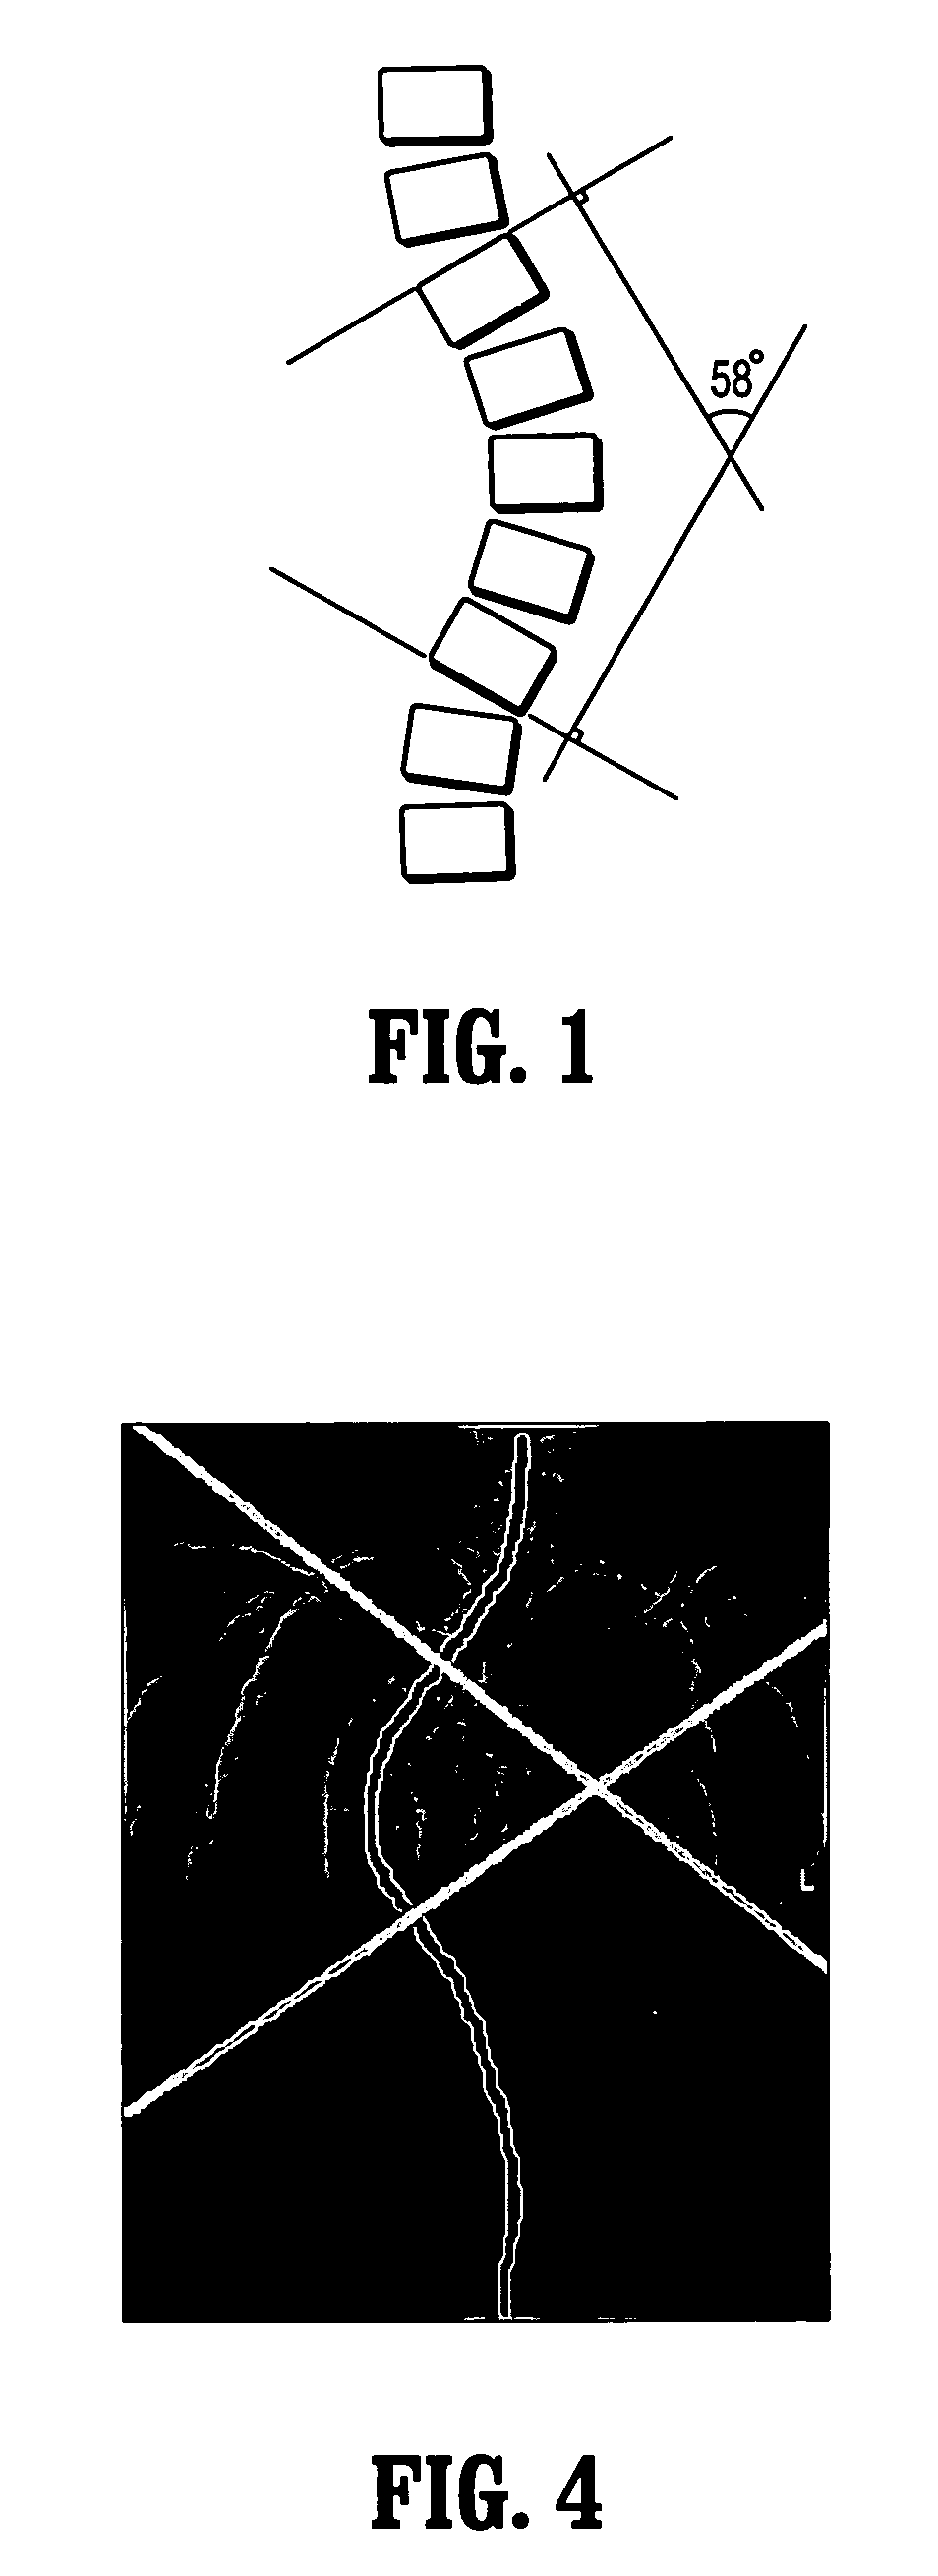 Systems and methods for computer aided detection of spinal curvature using images and angle measurements